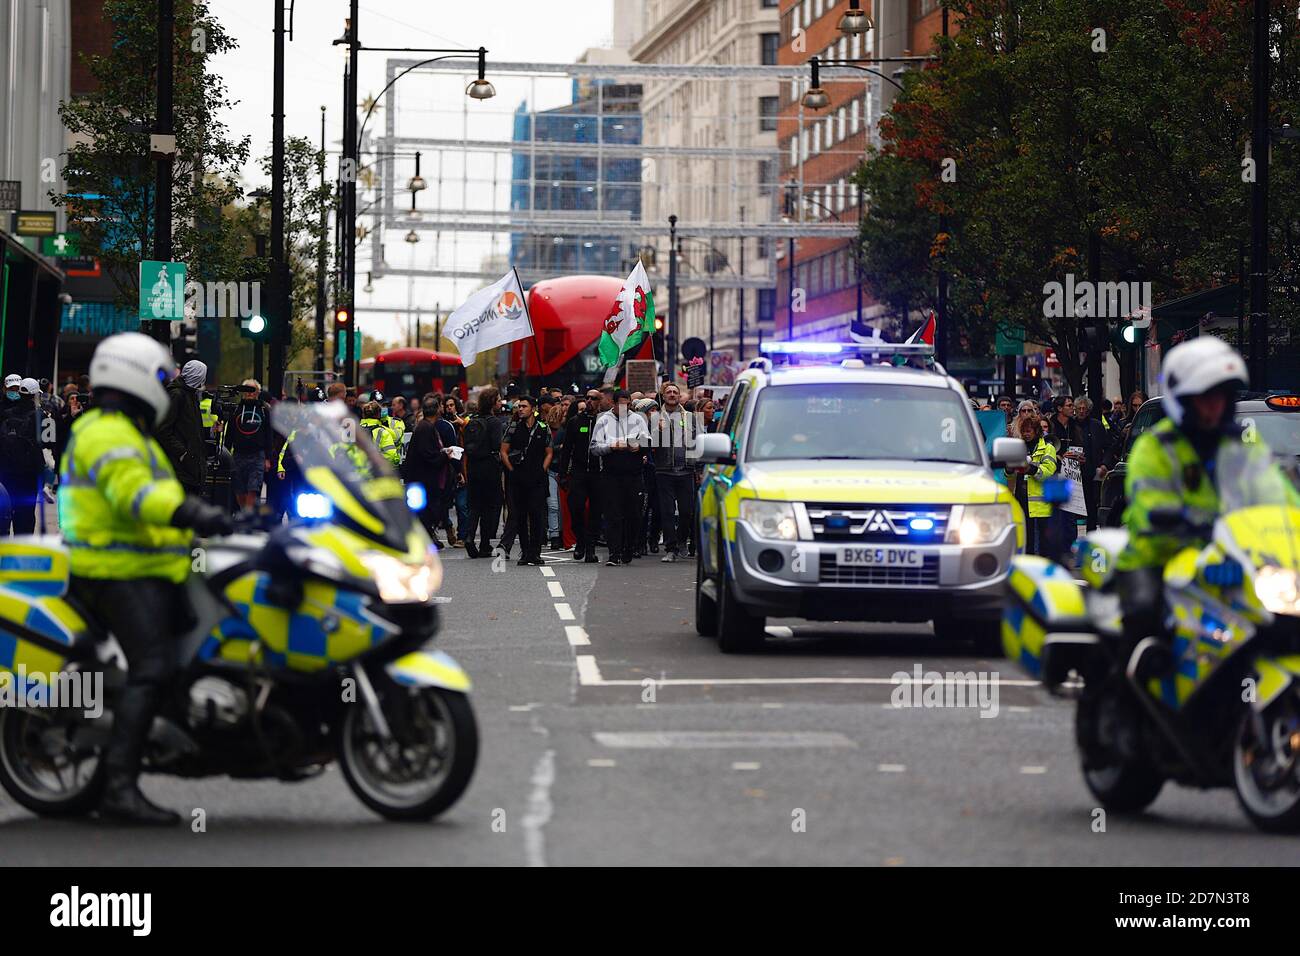 Hyde Park, London, UK. 24 October, 2020. Further action by anti lockdown protesters who are meeting and protesting in Hyde Park, London. No social distancing is being observed and no masks worn by attendants. The March proceeds down Oxford street. Photo Credit: Paul Lawrenson-PAL Media/Alamy Live News Stock Photo